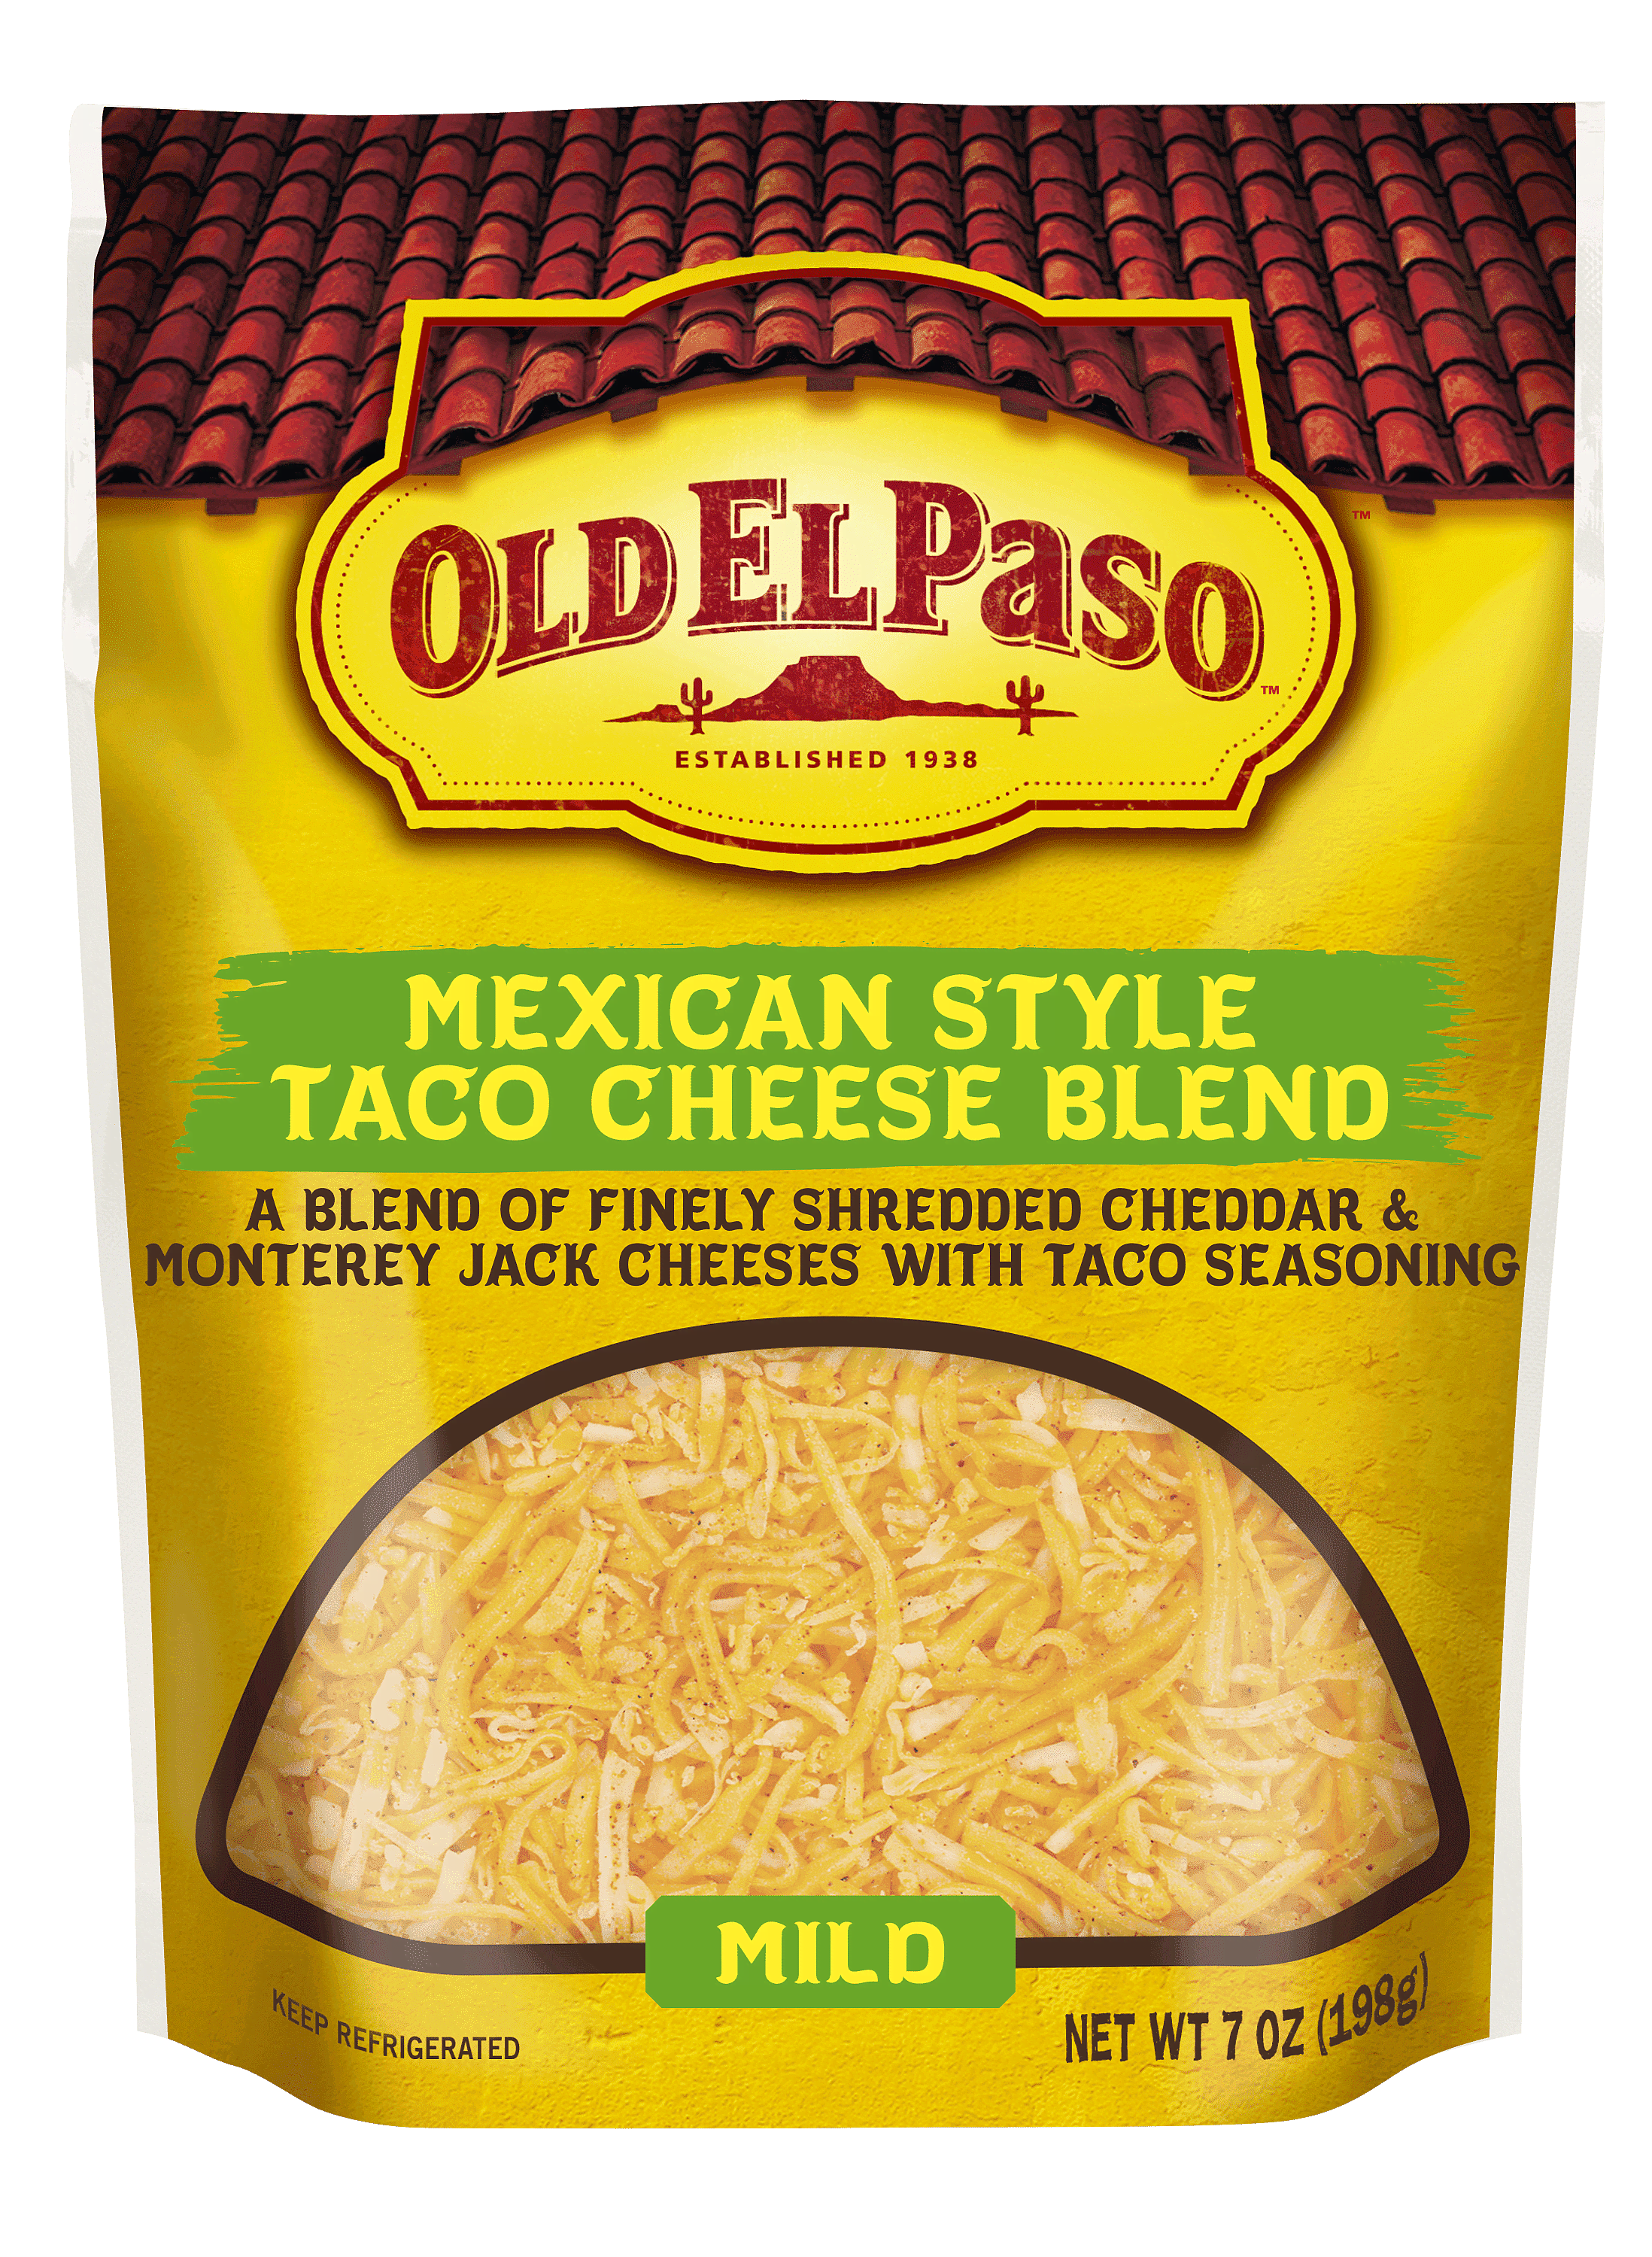 Shredded Mexican Style Taco Cheese Blend - Old Paso